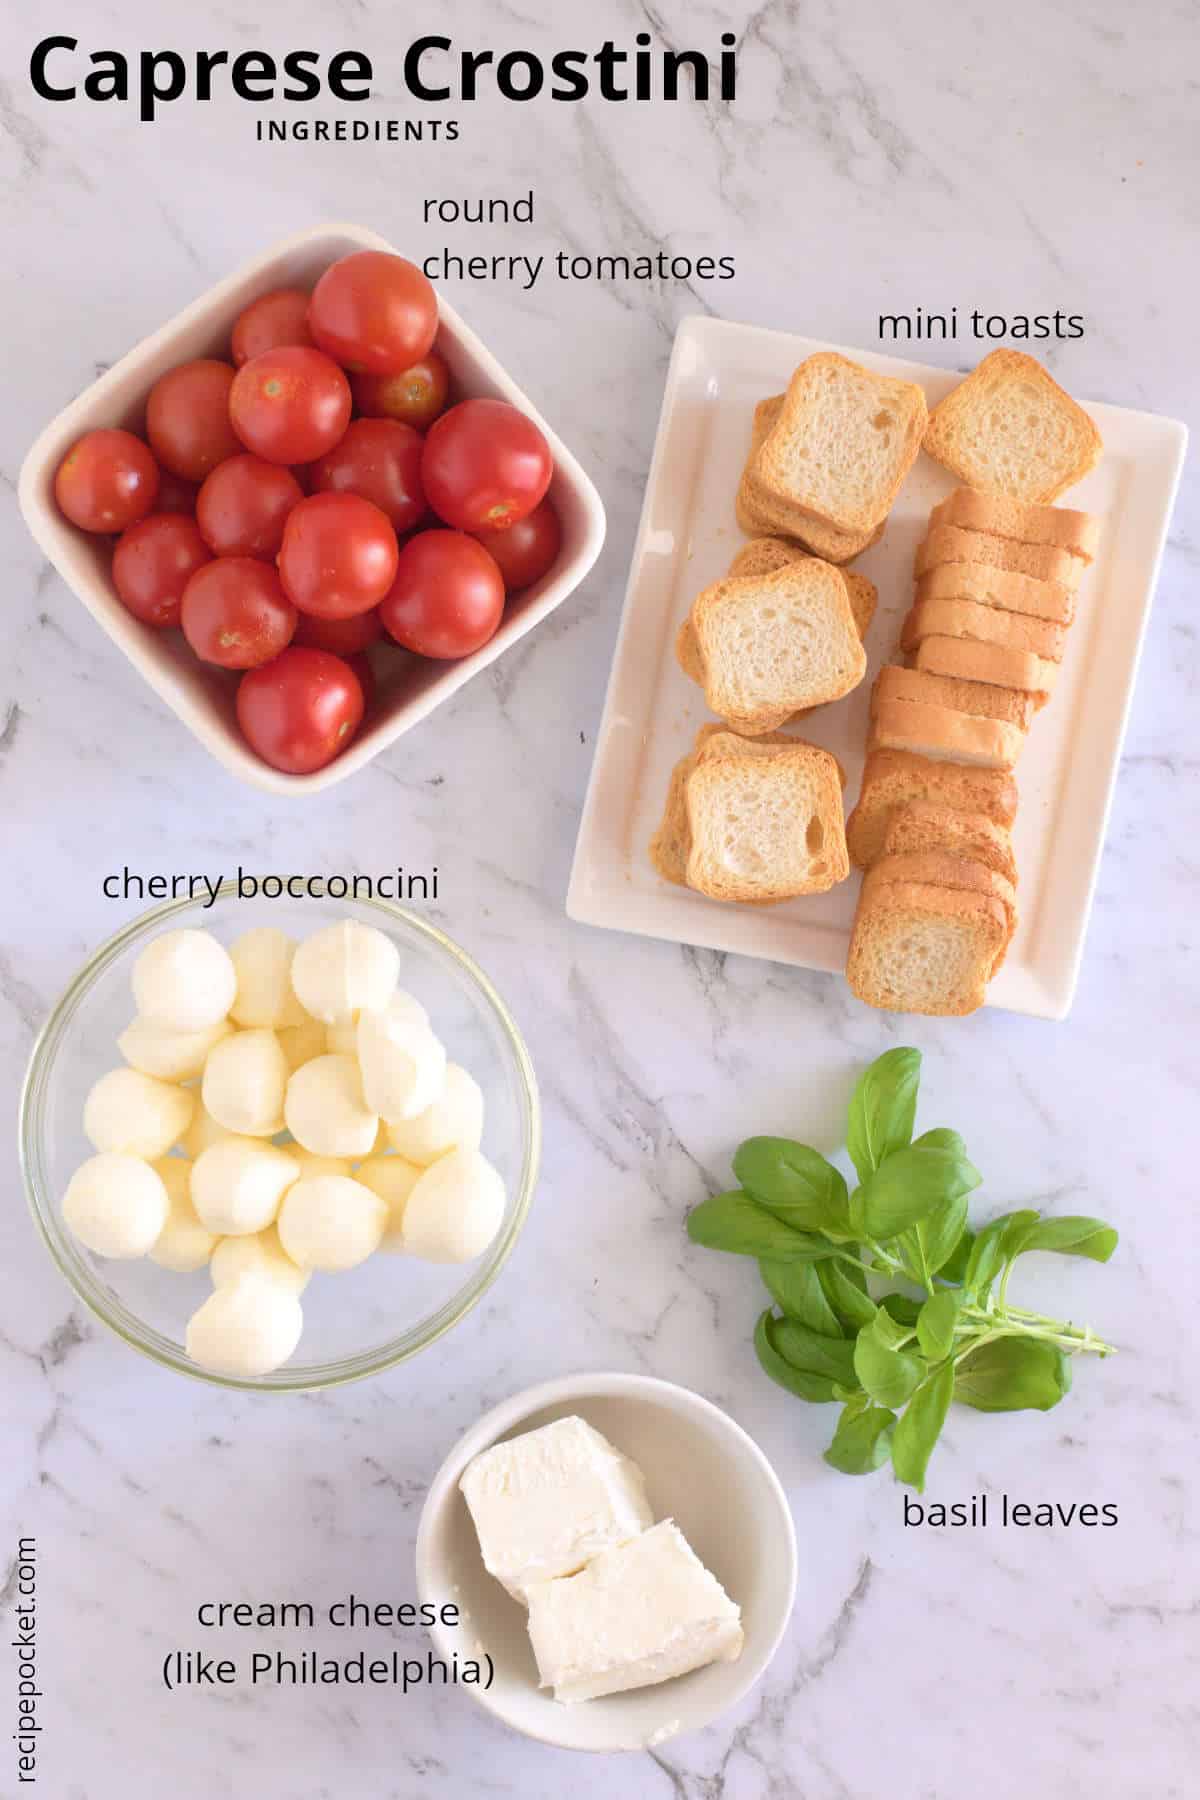 Image of the ingredients needed to make this recipe for caprese crostini.